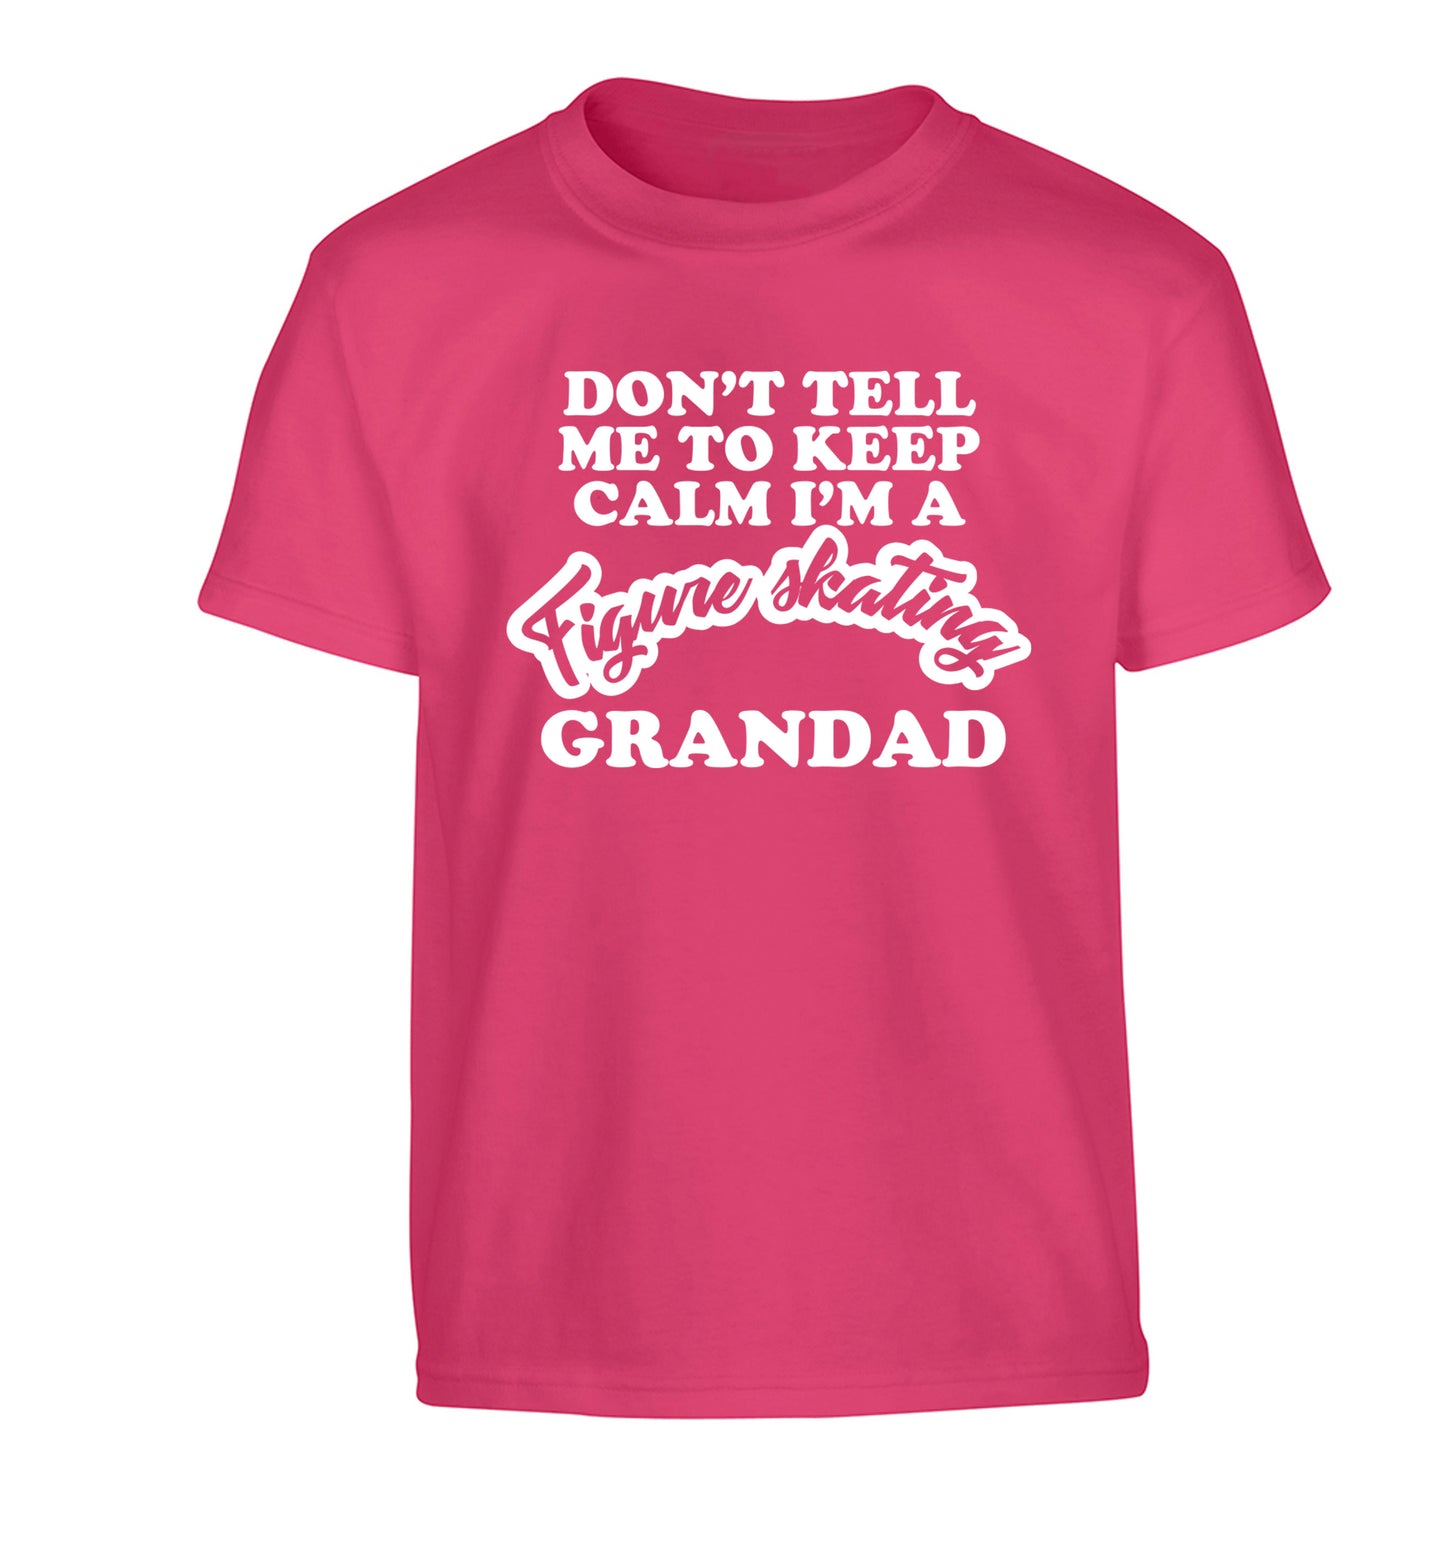 Don't tell me to keep calm I'm a figure skating grandad Children's pink Tshirt 12-14 Years